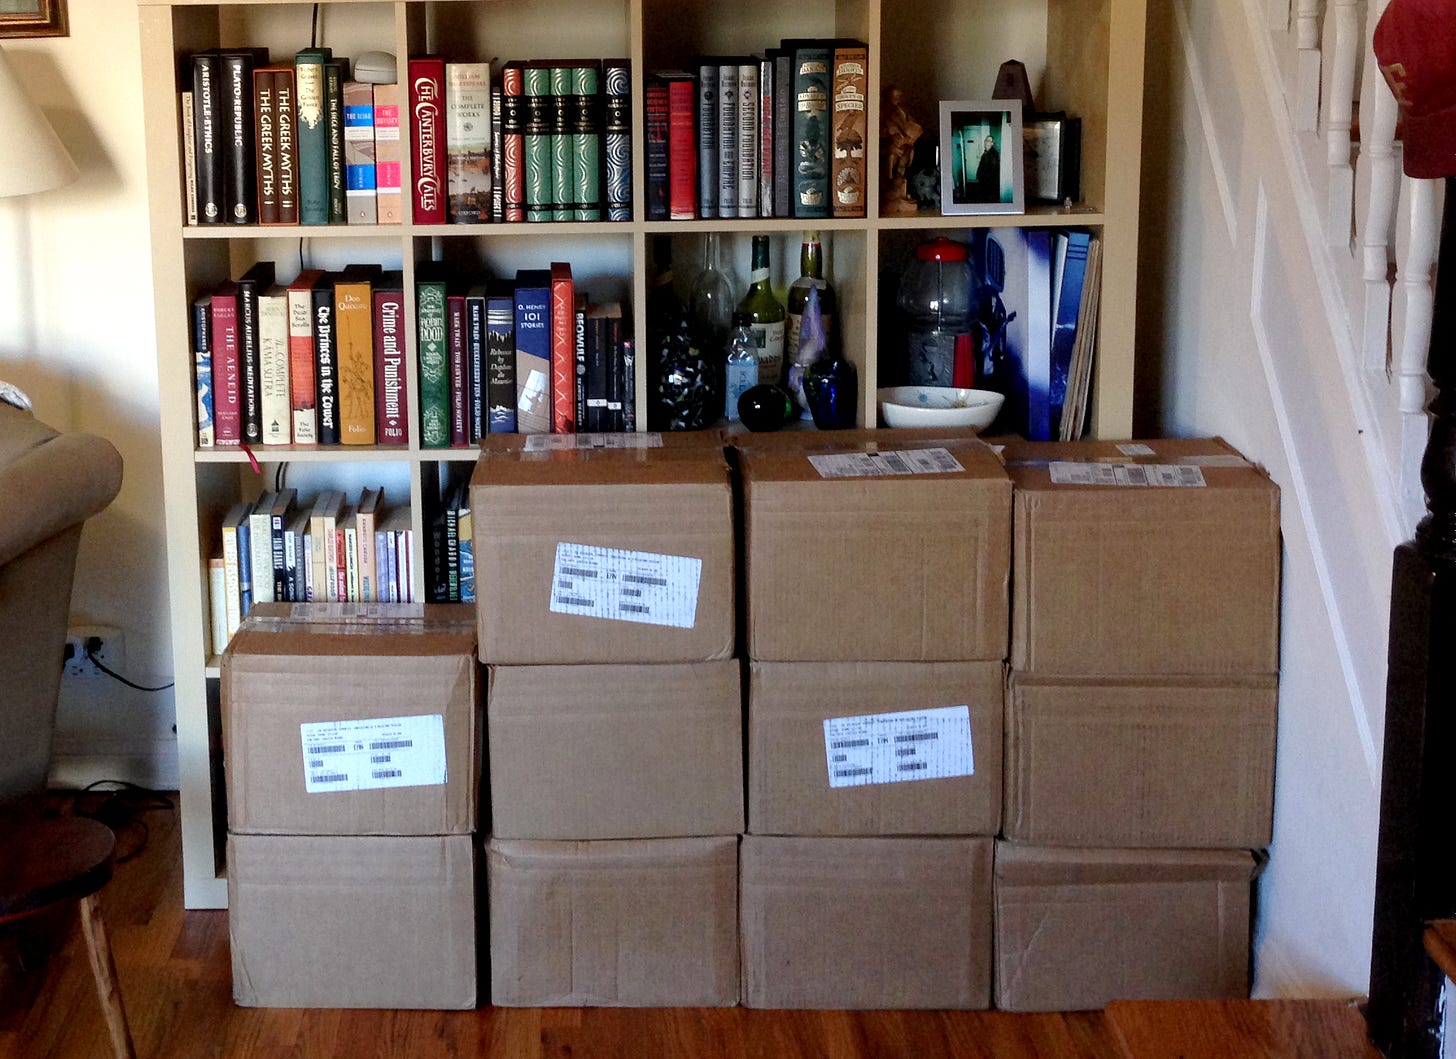 Eleven unopened cardboard cartons sit stacked before a bookcase crammed with books and knickknacks. A lamp and chair are partially visible to the left, with a rising staircase partially visible to the right.